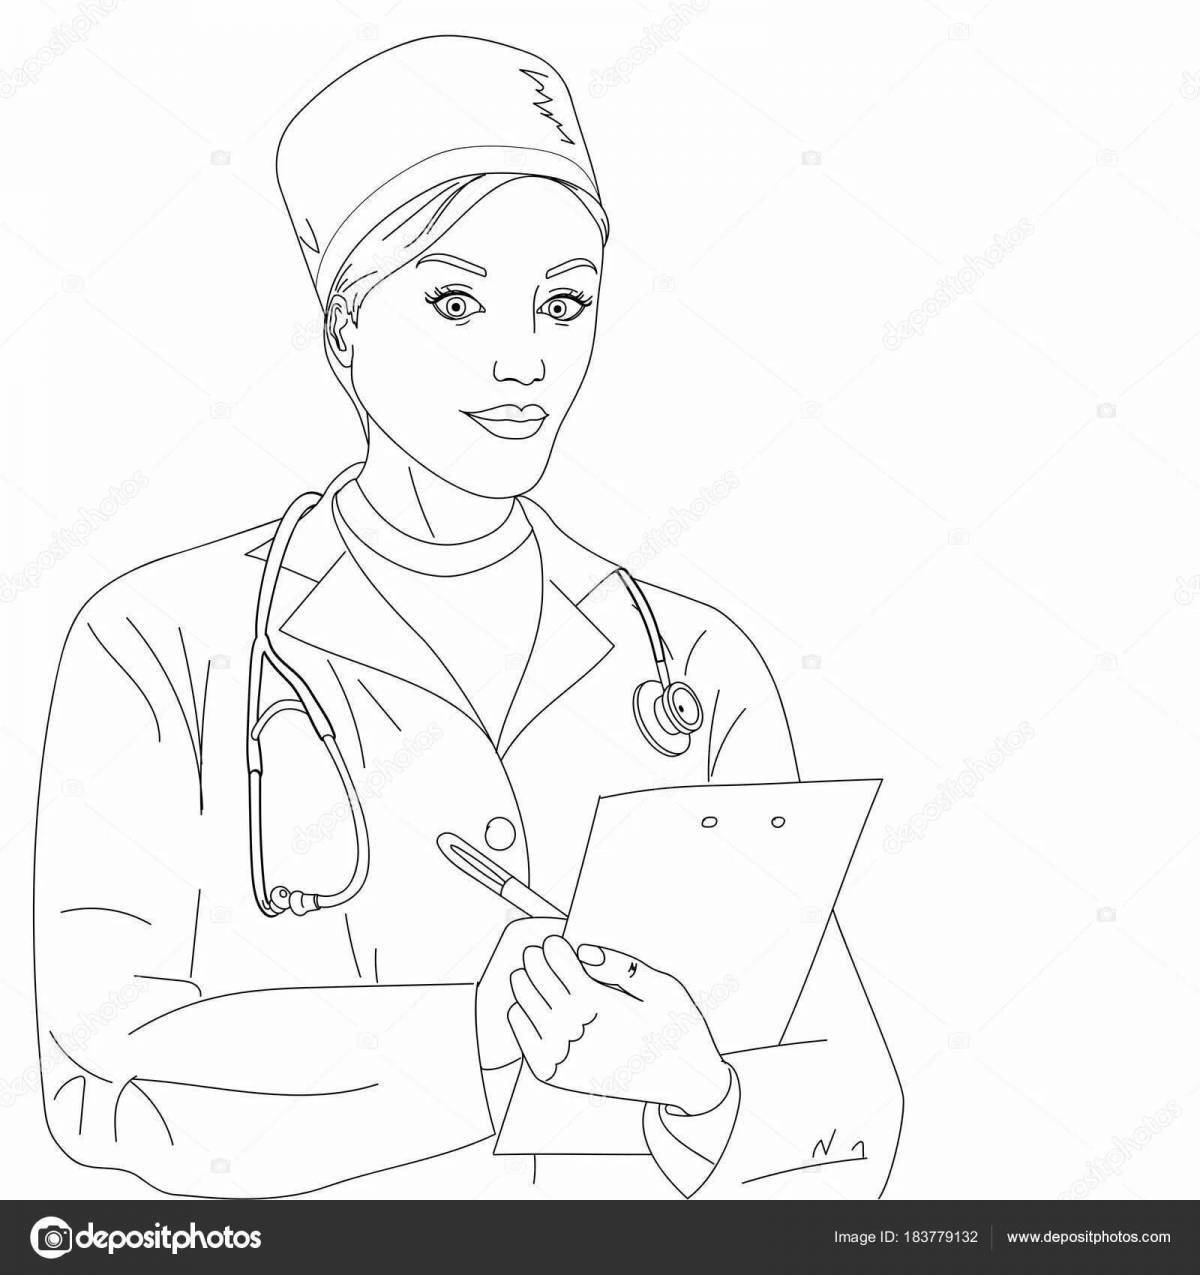 Playful surgeon coloring page for kids